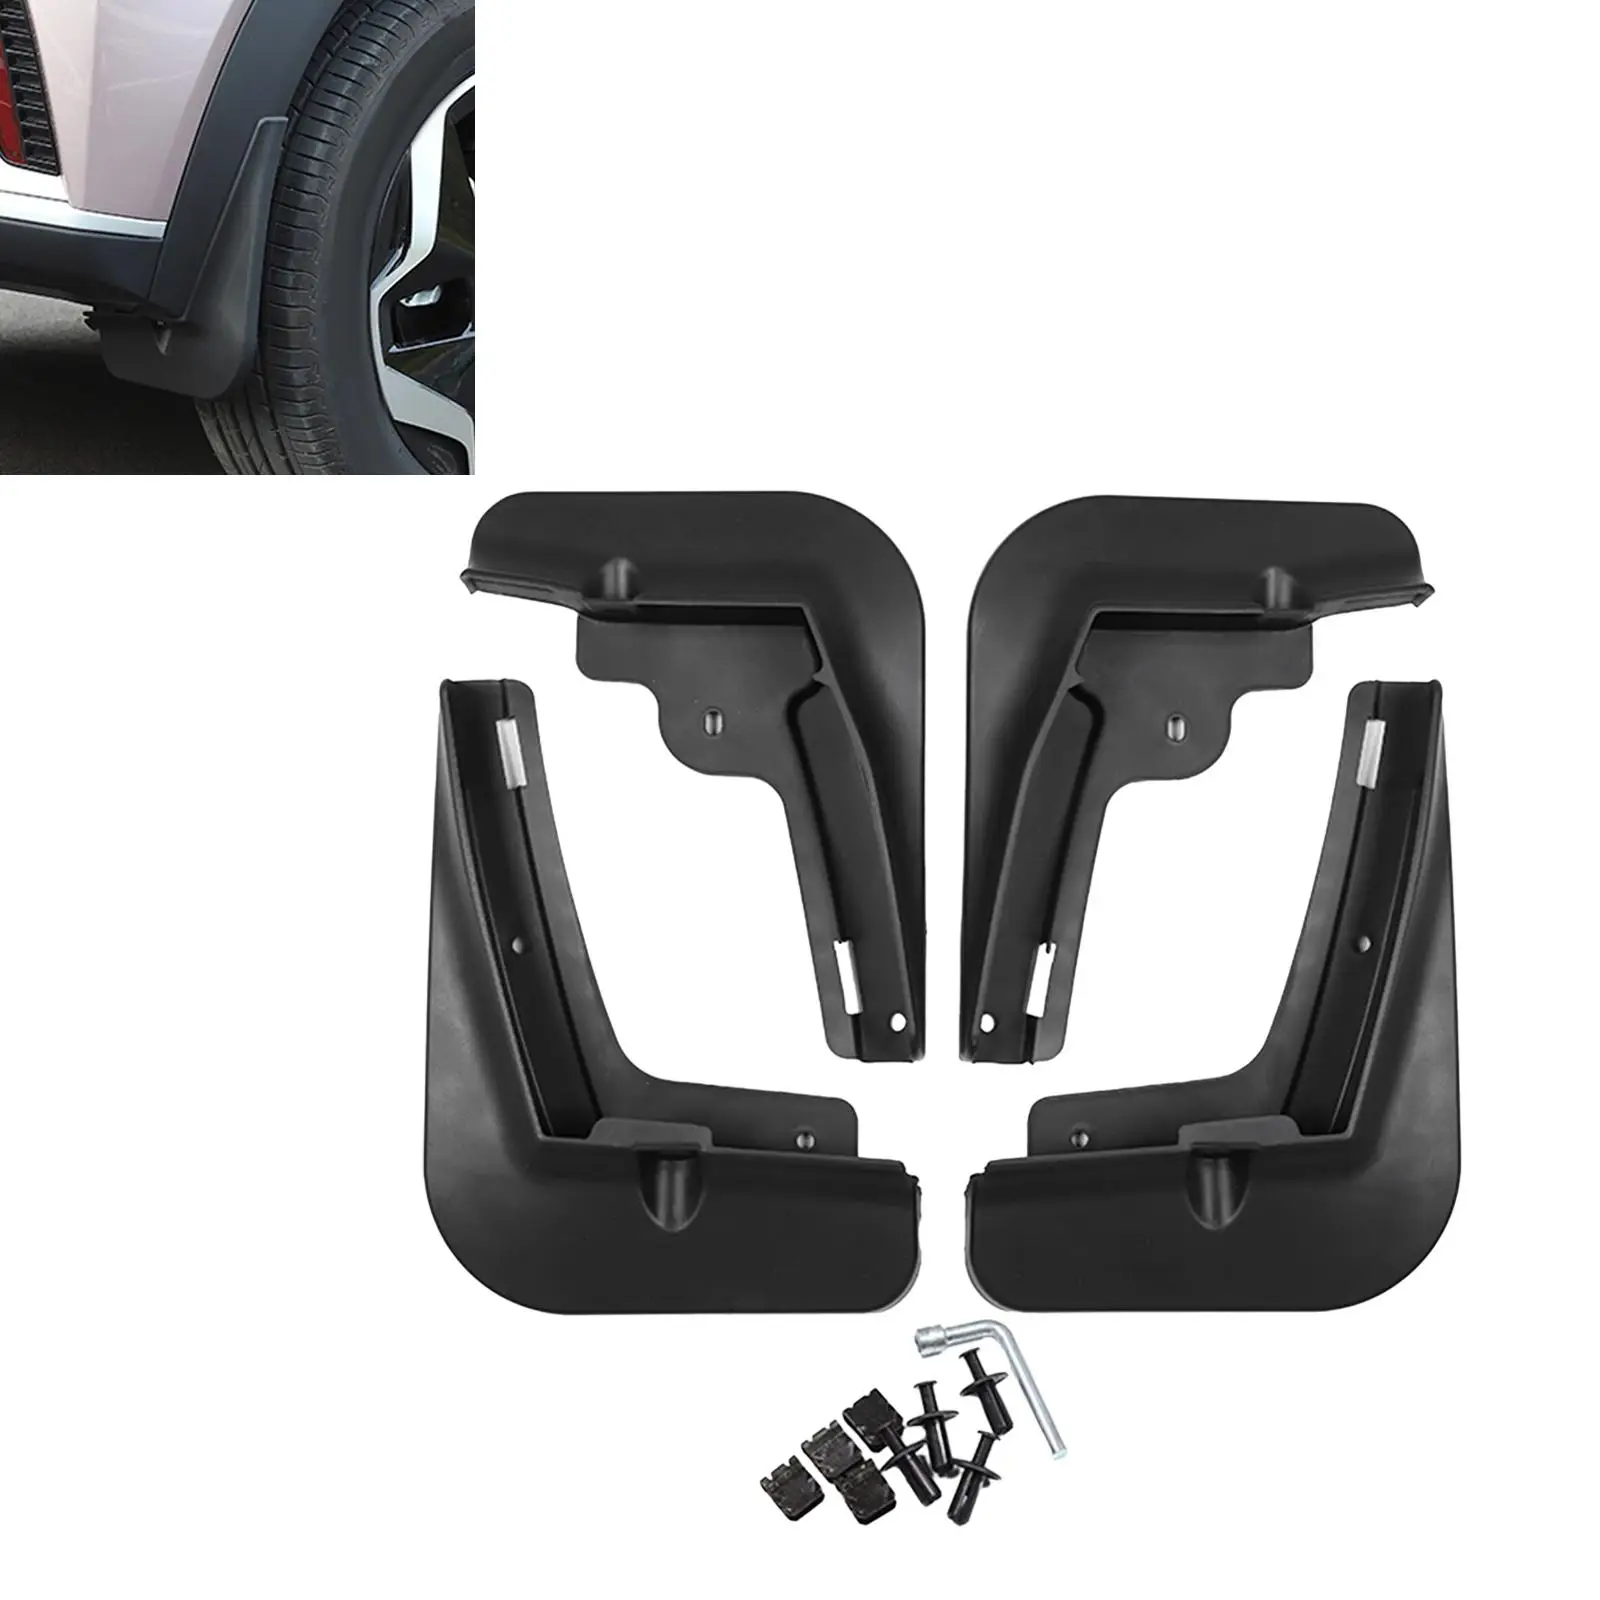 4Pcs Mudflaps Tires Splash Guards Kit Accessory for Byd Dolphin Sturdy